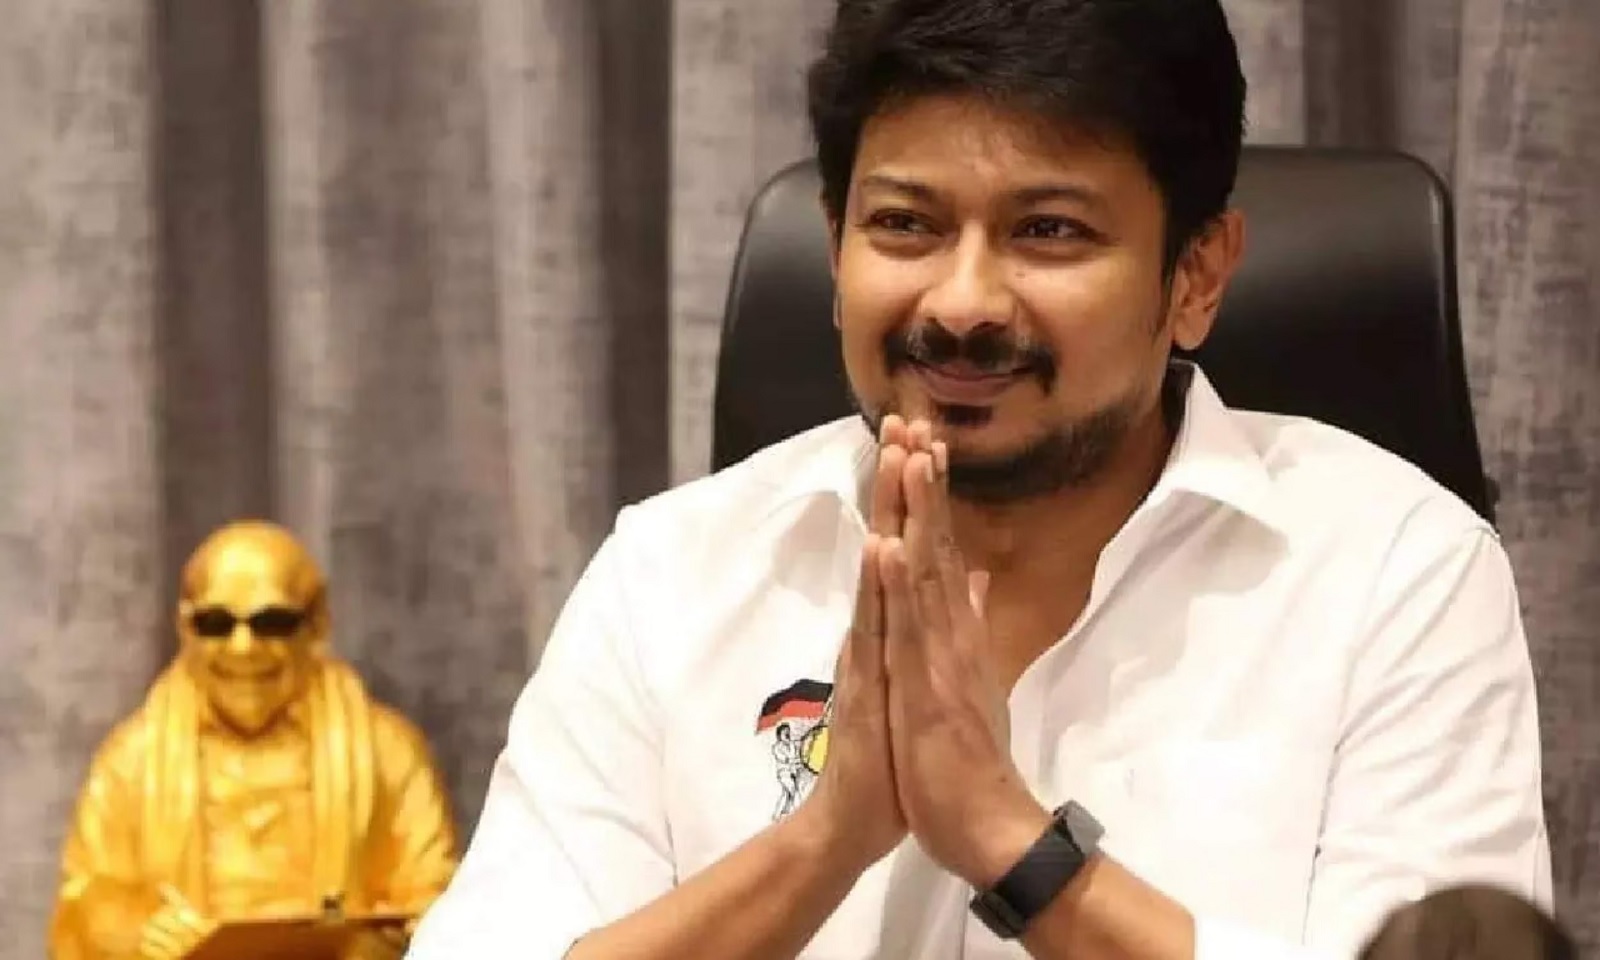 No one can harm DMK, says Udhayanidhi Stalin after ‘leaked’ audio